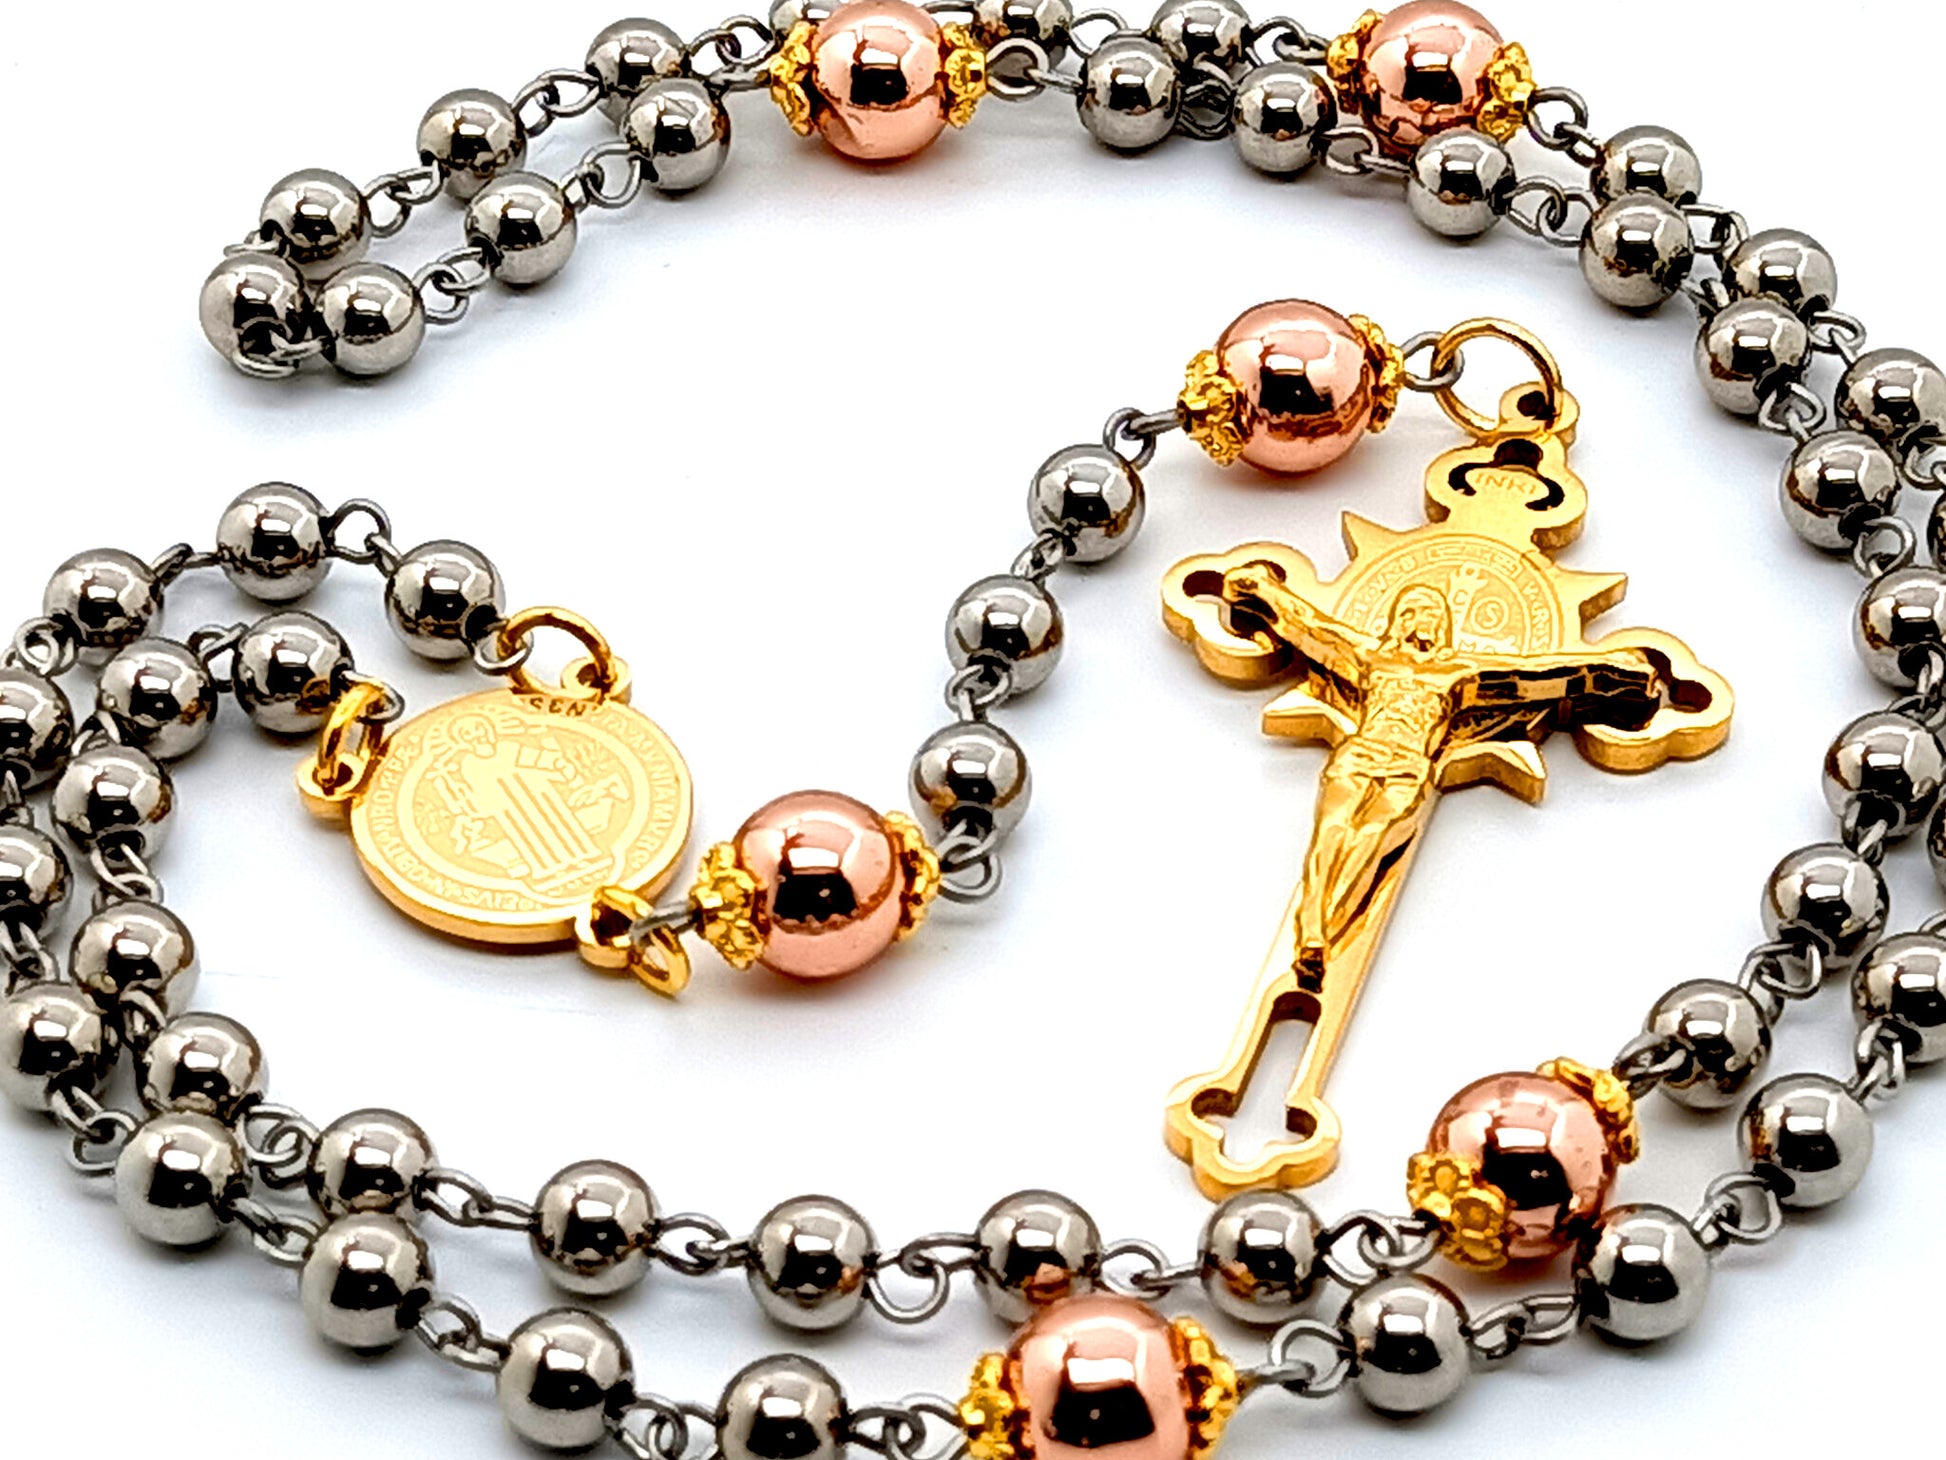 Saint Benedict unique rosary beads with stainless steel and rose gold hematite gemstone beads and etched gold plated Saint Benedict crucifix.